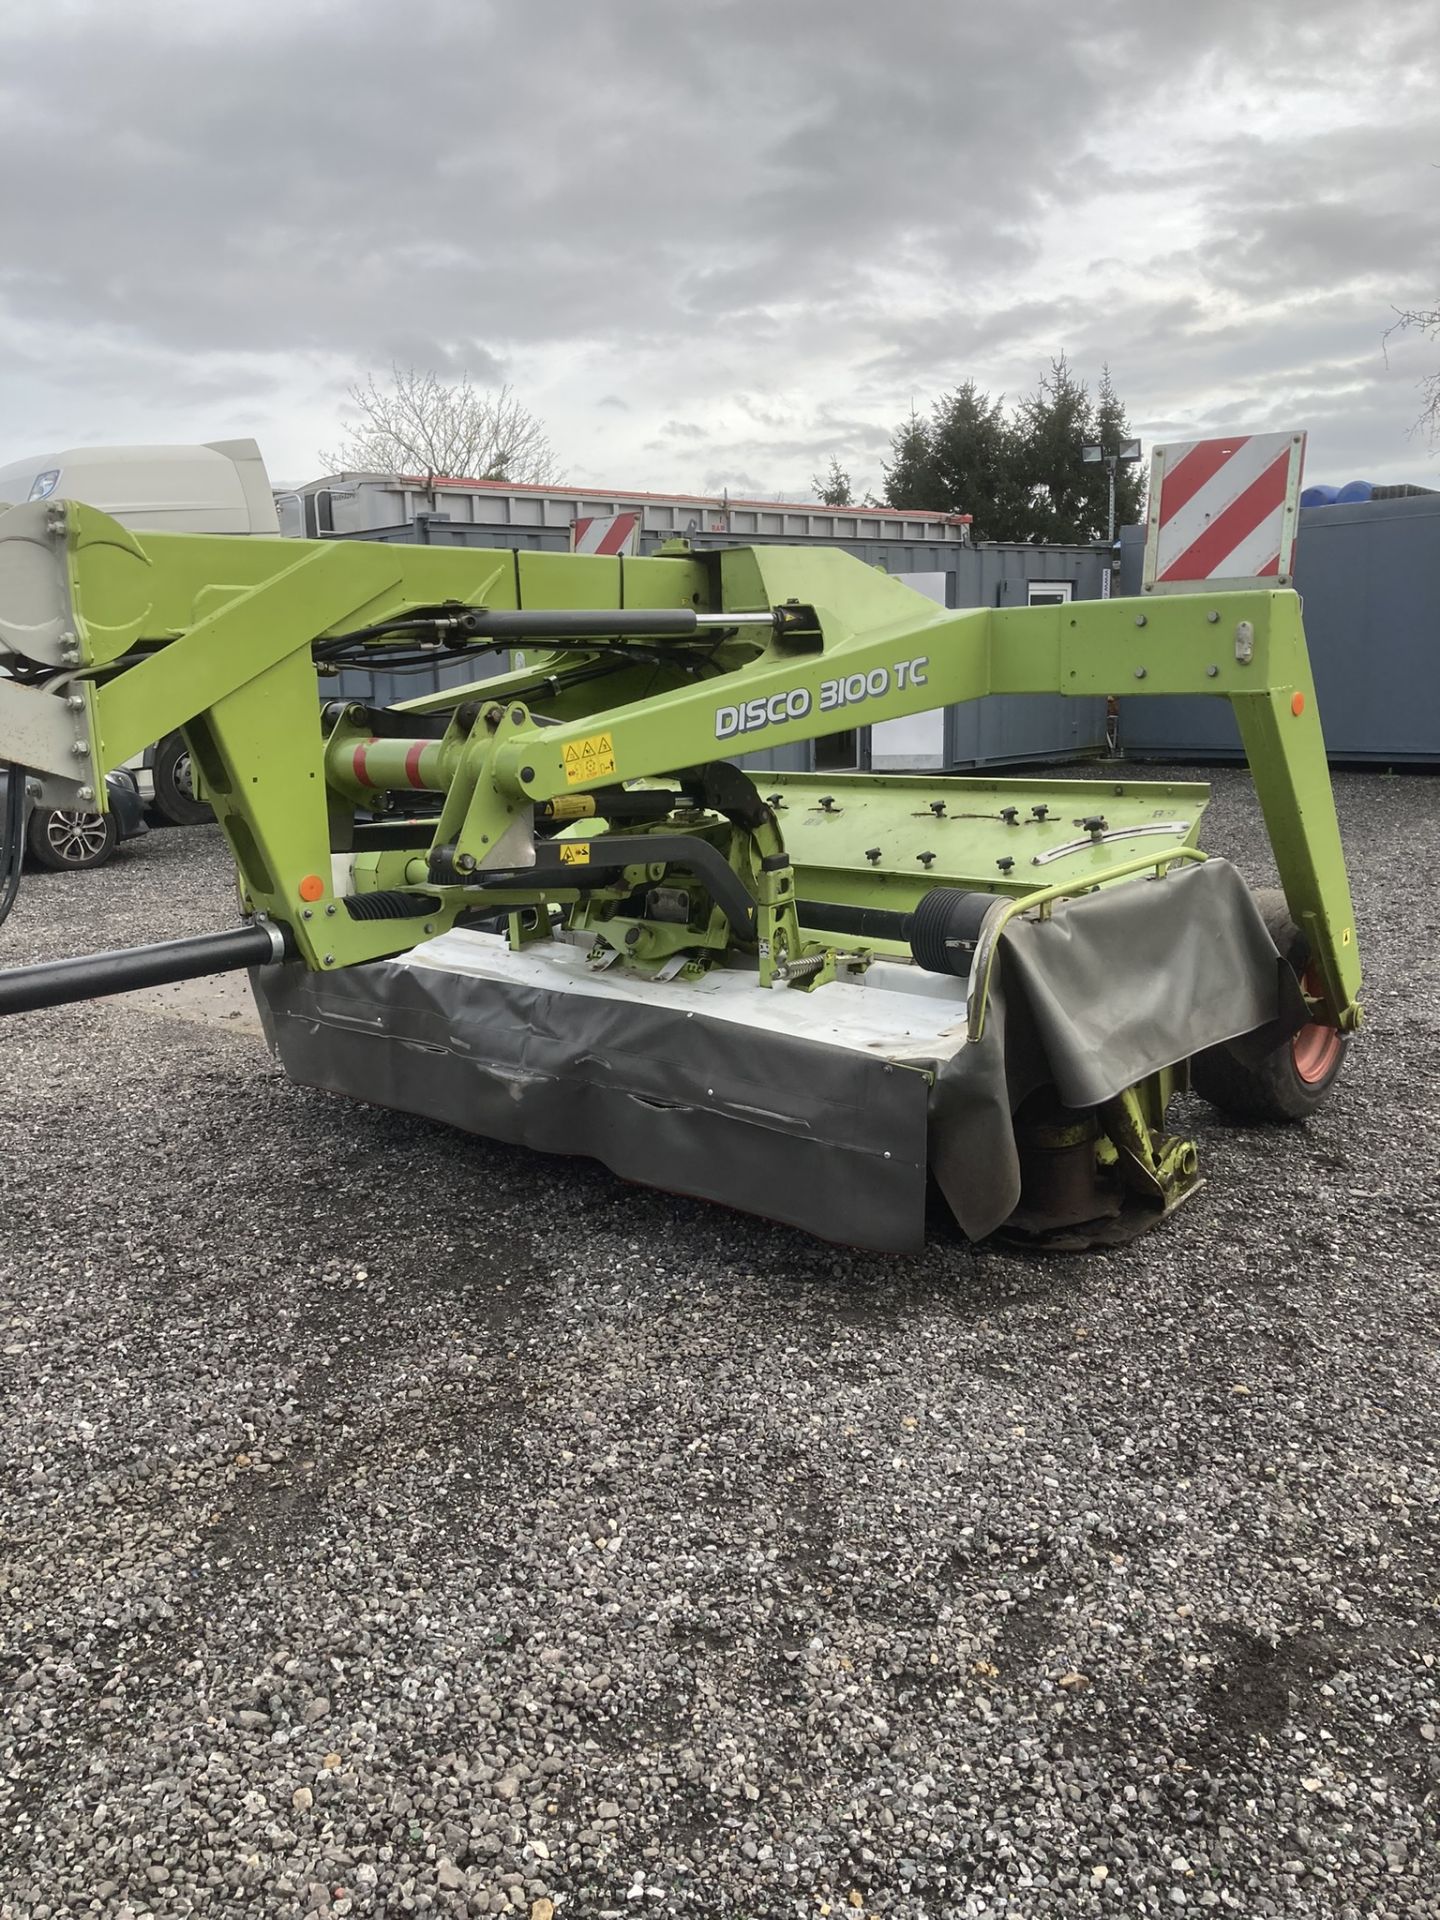 2010 Claas Disco 3100TC Type 51 Trailed Mower, S/NO. FS101134, Cutting Width 3.1m, Gross weight 2, - Image 5 of 7